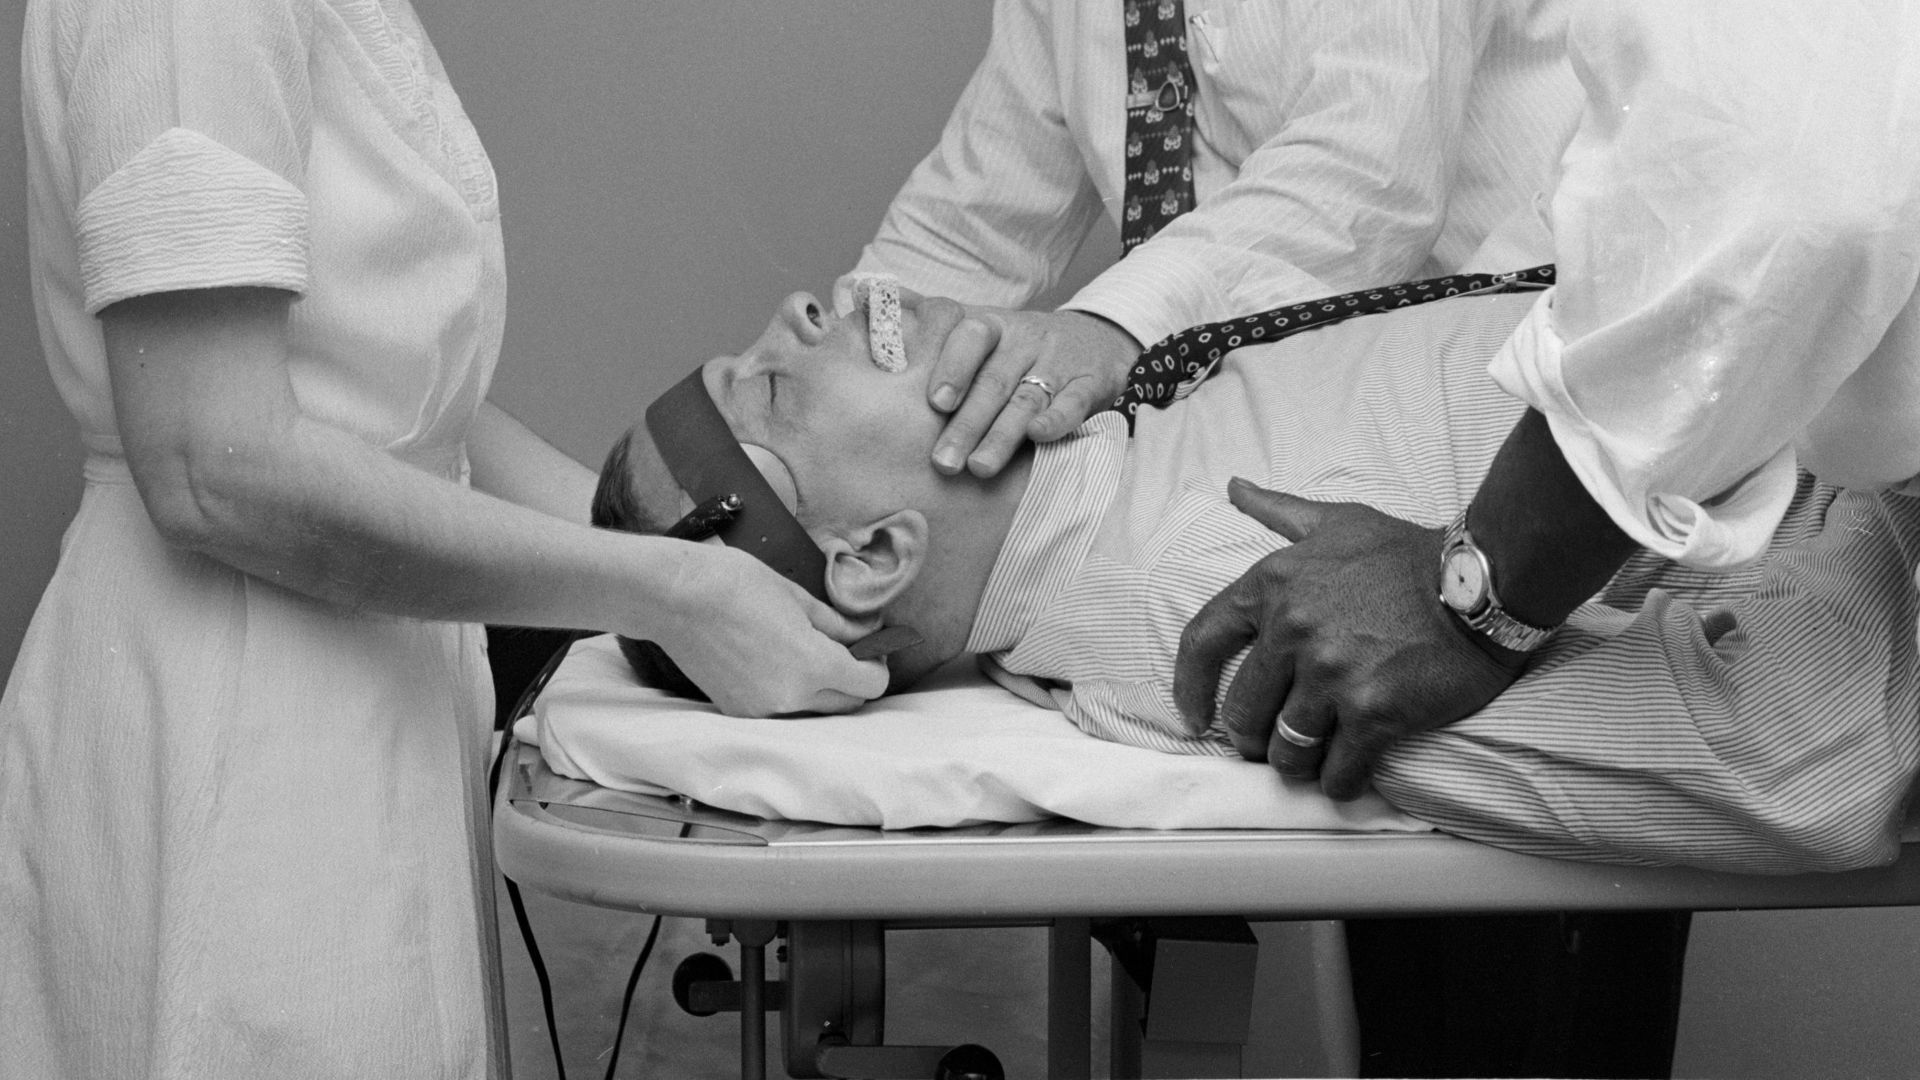 In the 1950s, a patient at Hillside mental hospital undergoes electroconvulsive therapy (ECT), which is used to treat severe depression.